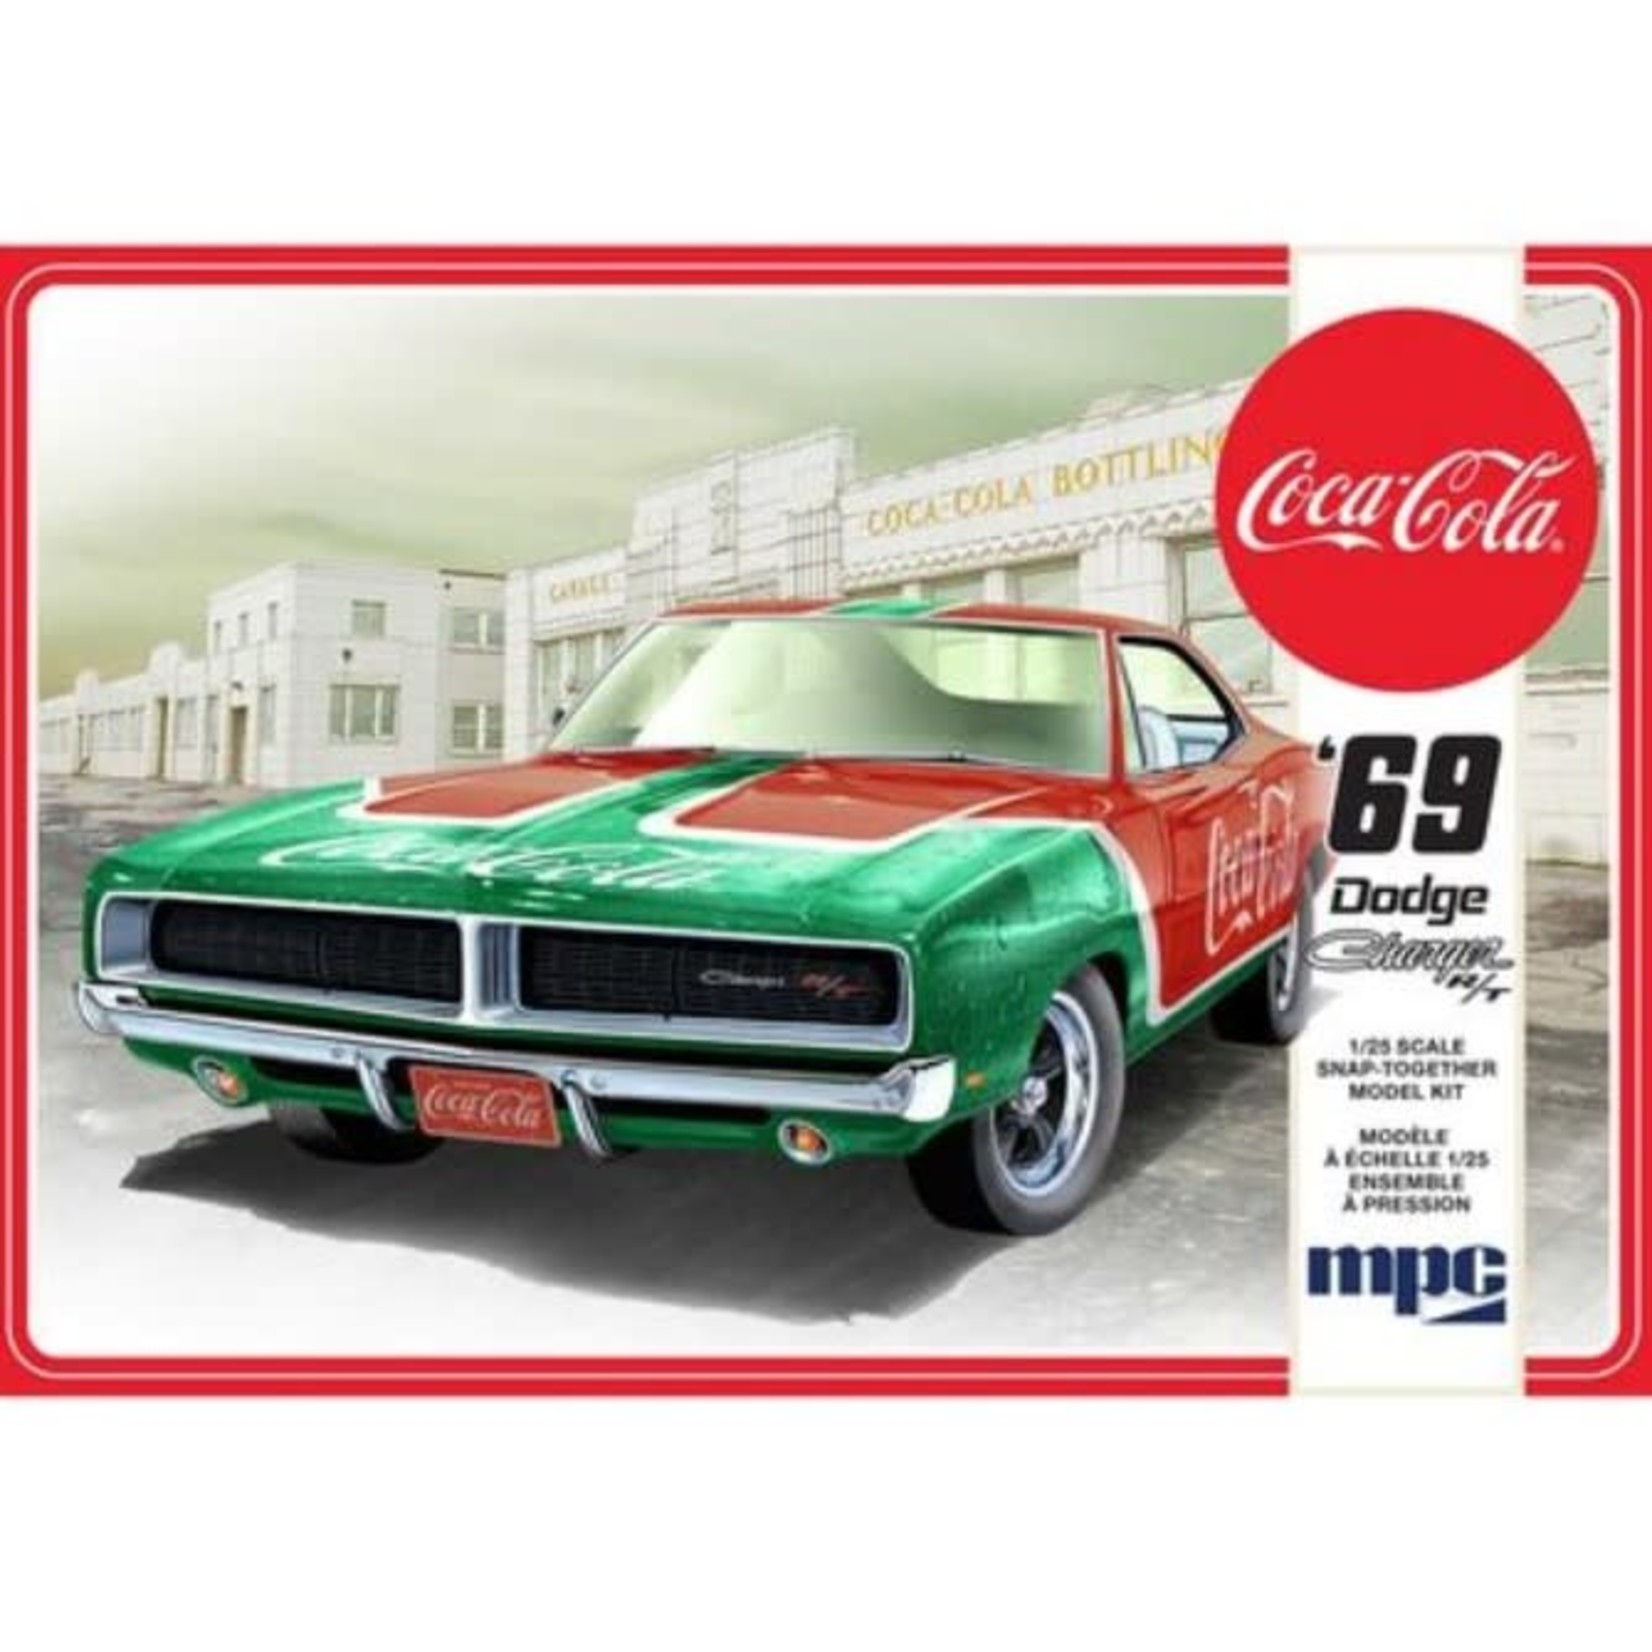 MPC Models 1/25 '69 Dodge Charger Rt Coca-Cola Snap Together Kit